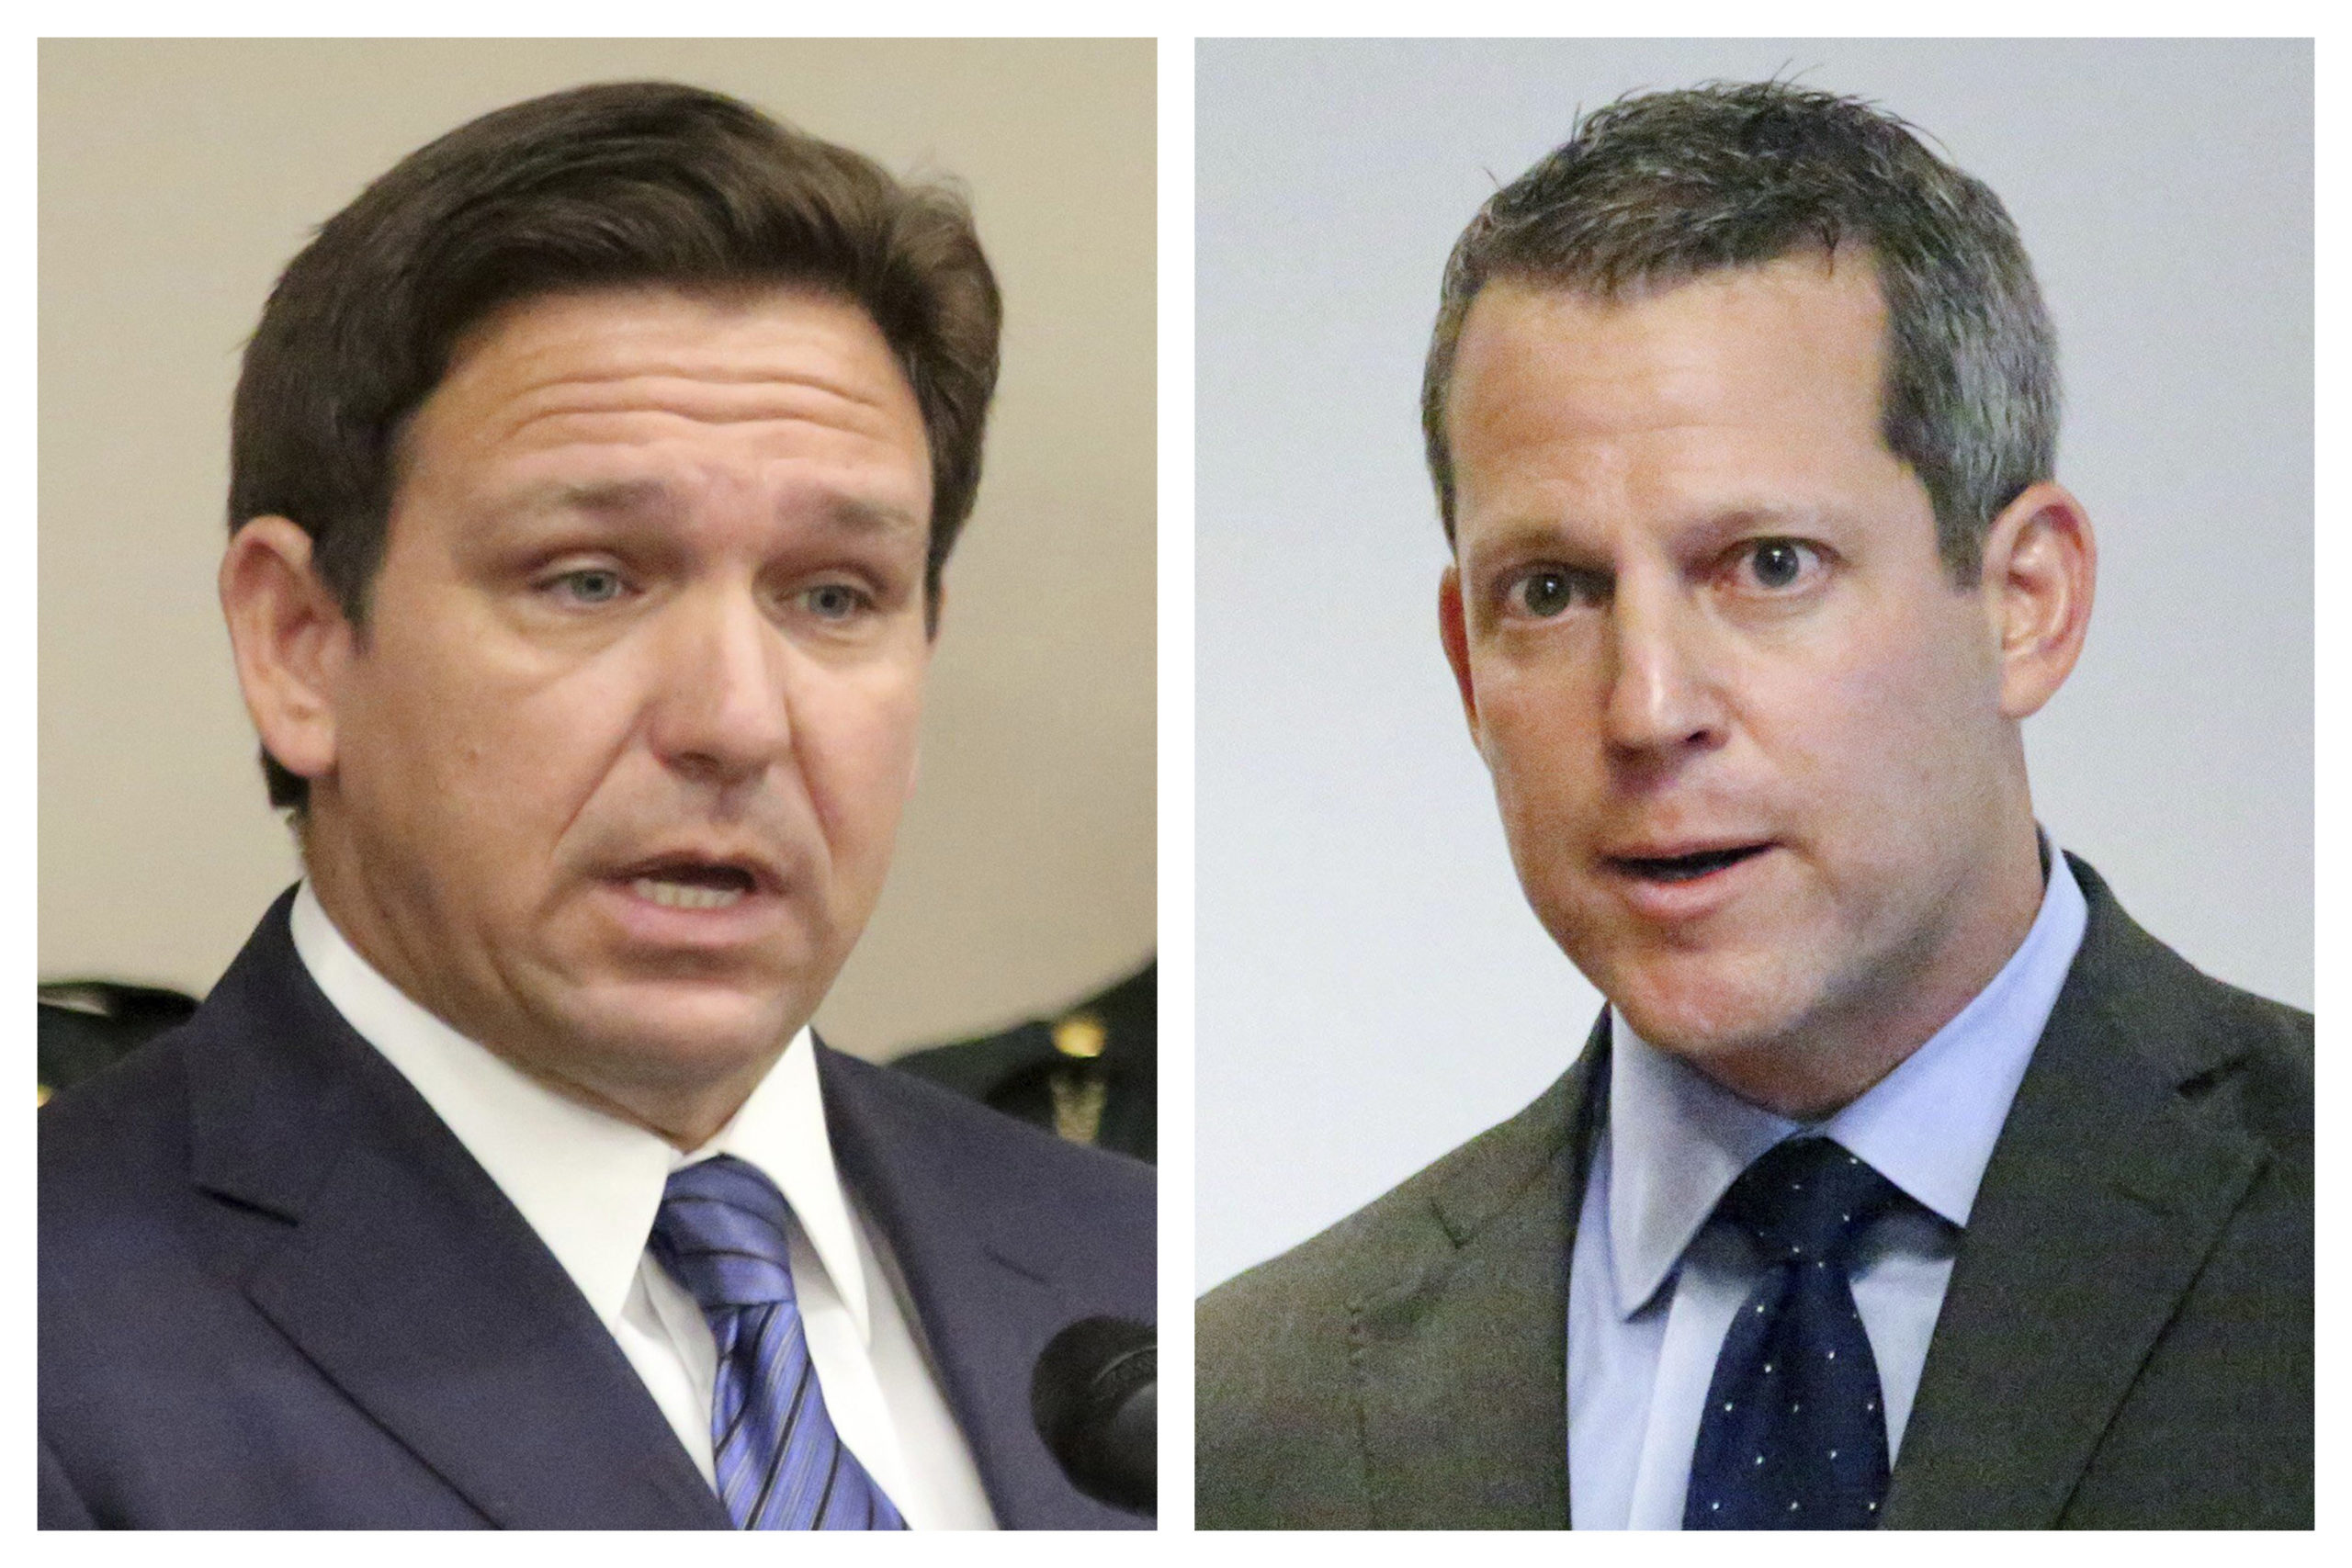 In a court filing, Florida Gov. Ron DeSantis said Andrew Warren, right, "had no First Amendment right, as a public official, to declare that he would not perform his duties under Florida law."